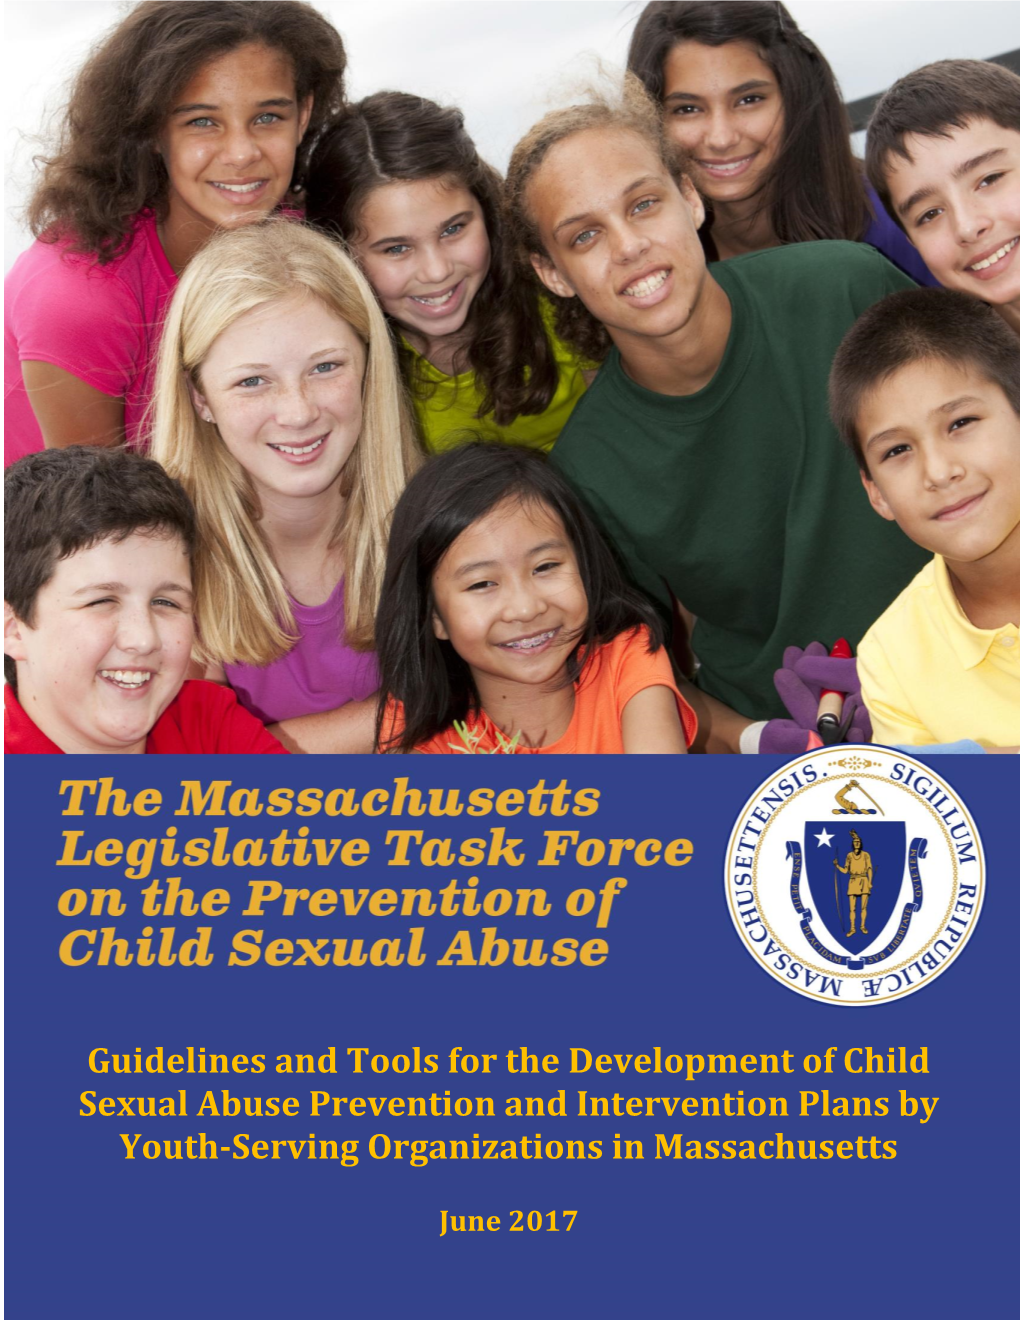 Child Sexual Abuse Prevention and Intervention Plans by Youth-Serving Organizations in Massachusetts